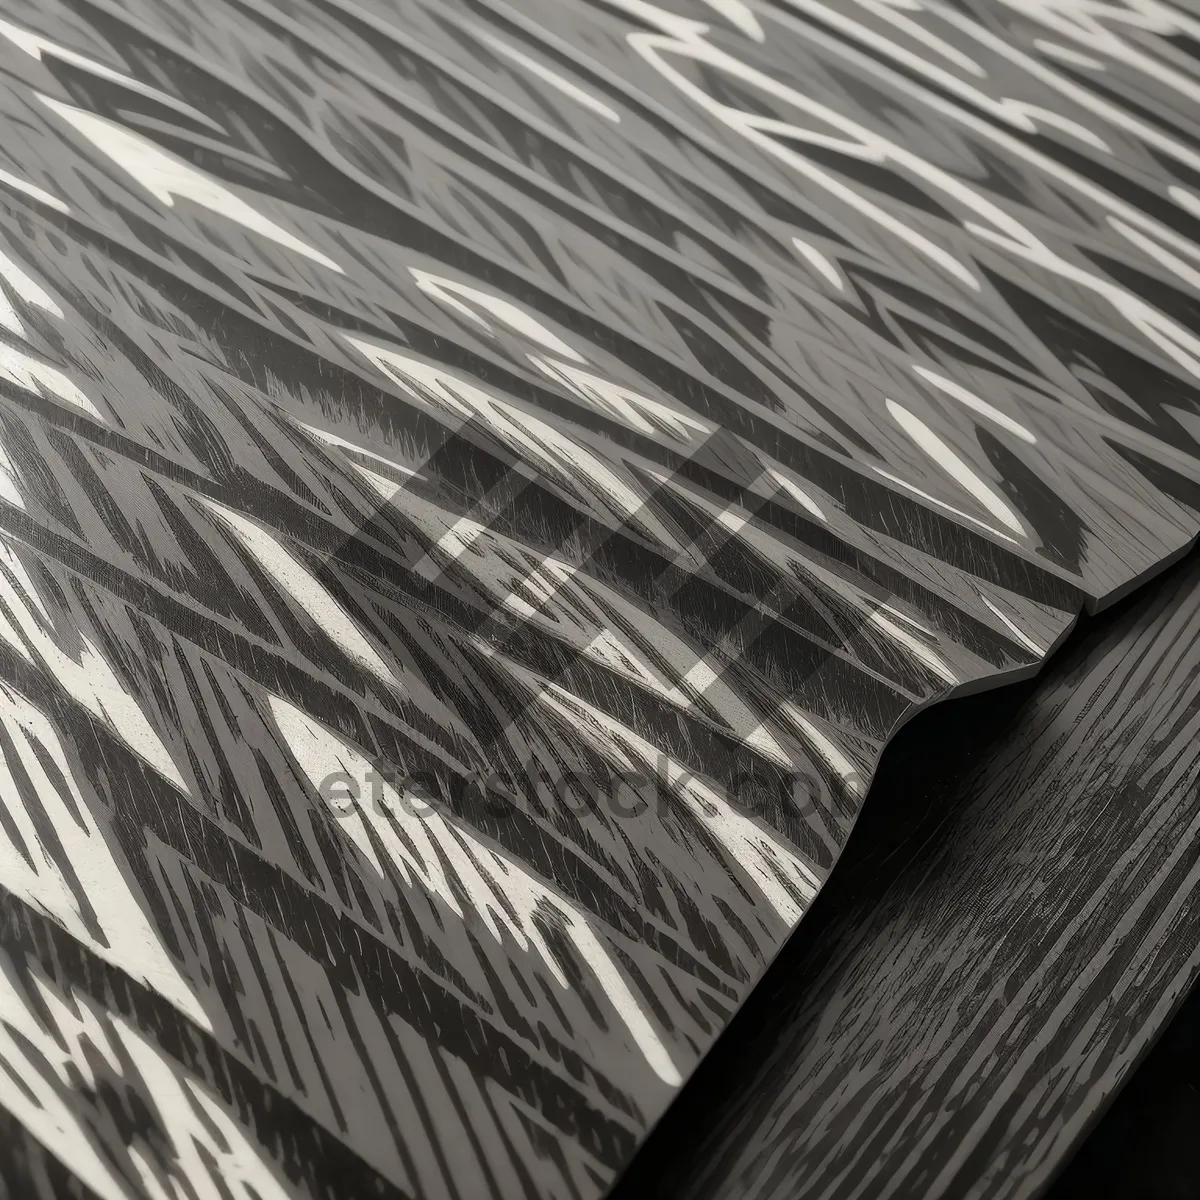 Picture of Textured tile roof with intricate pattern and design